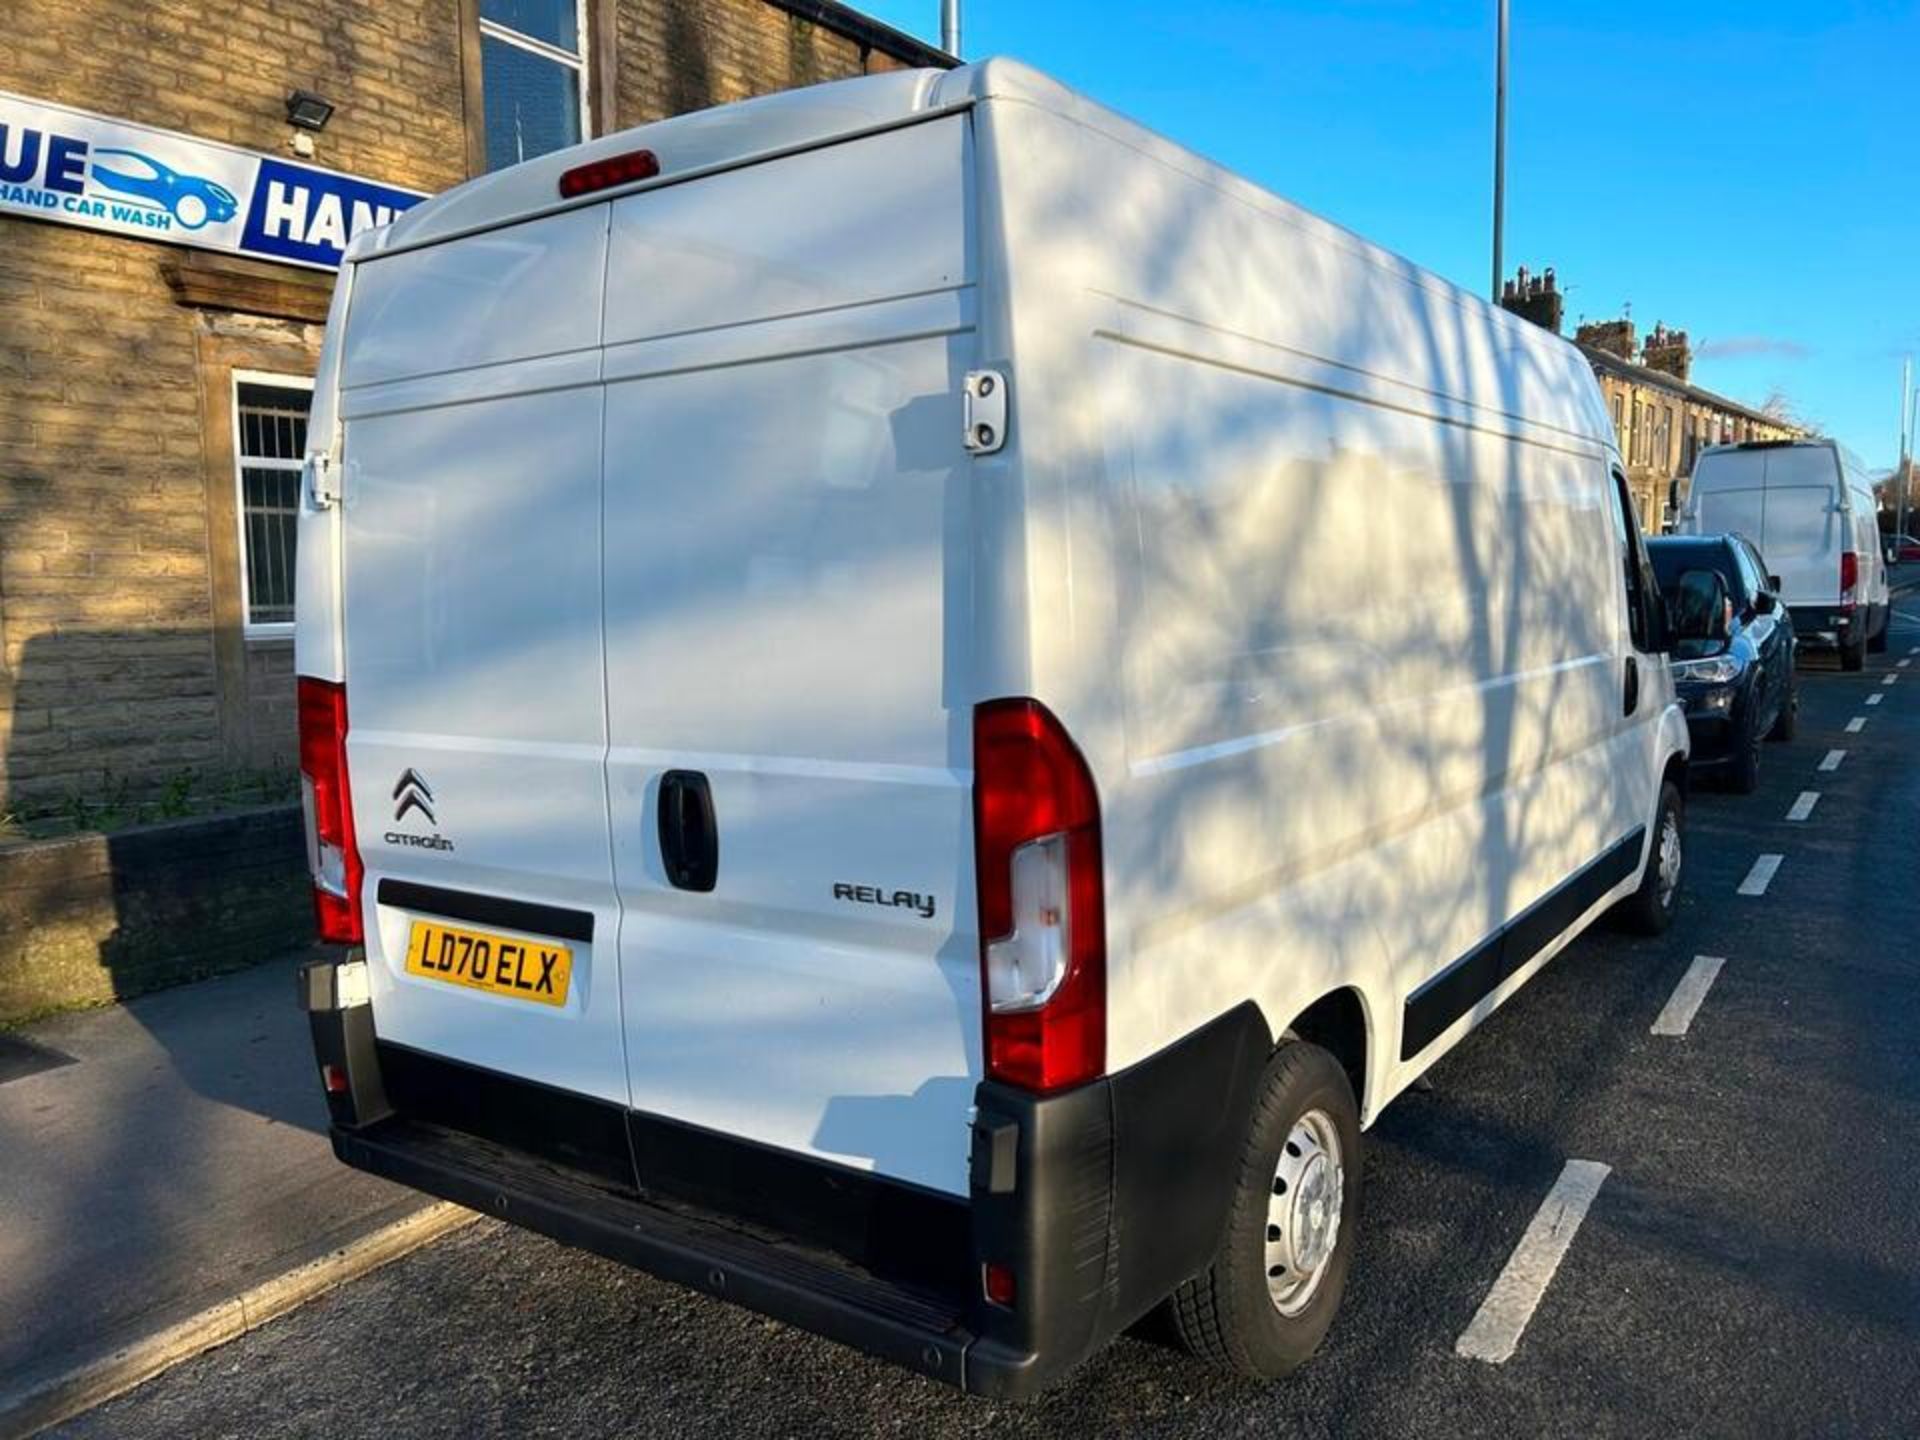 2020 CITROEN RELAY - ONLY 84K MILES -HPI CLEAR- READY FOR ROAD! - Image 5 of 13